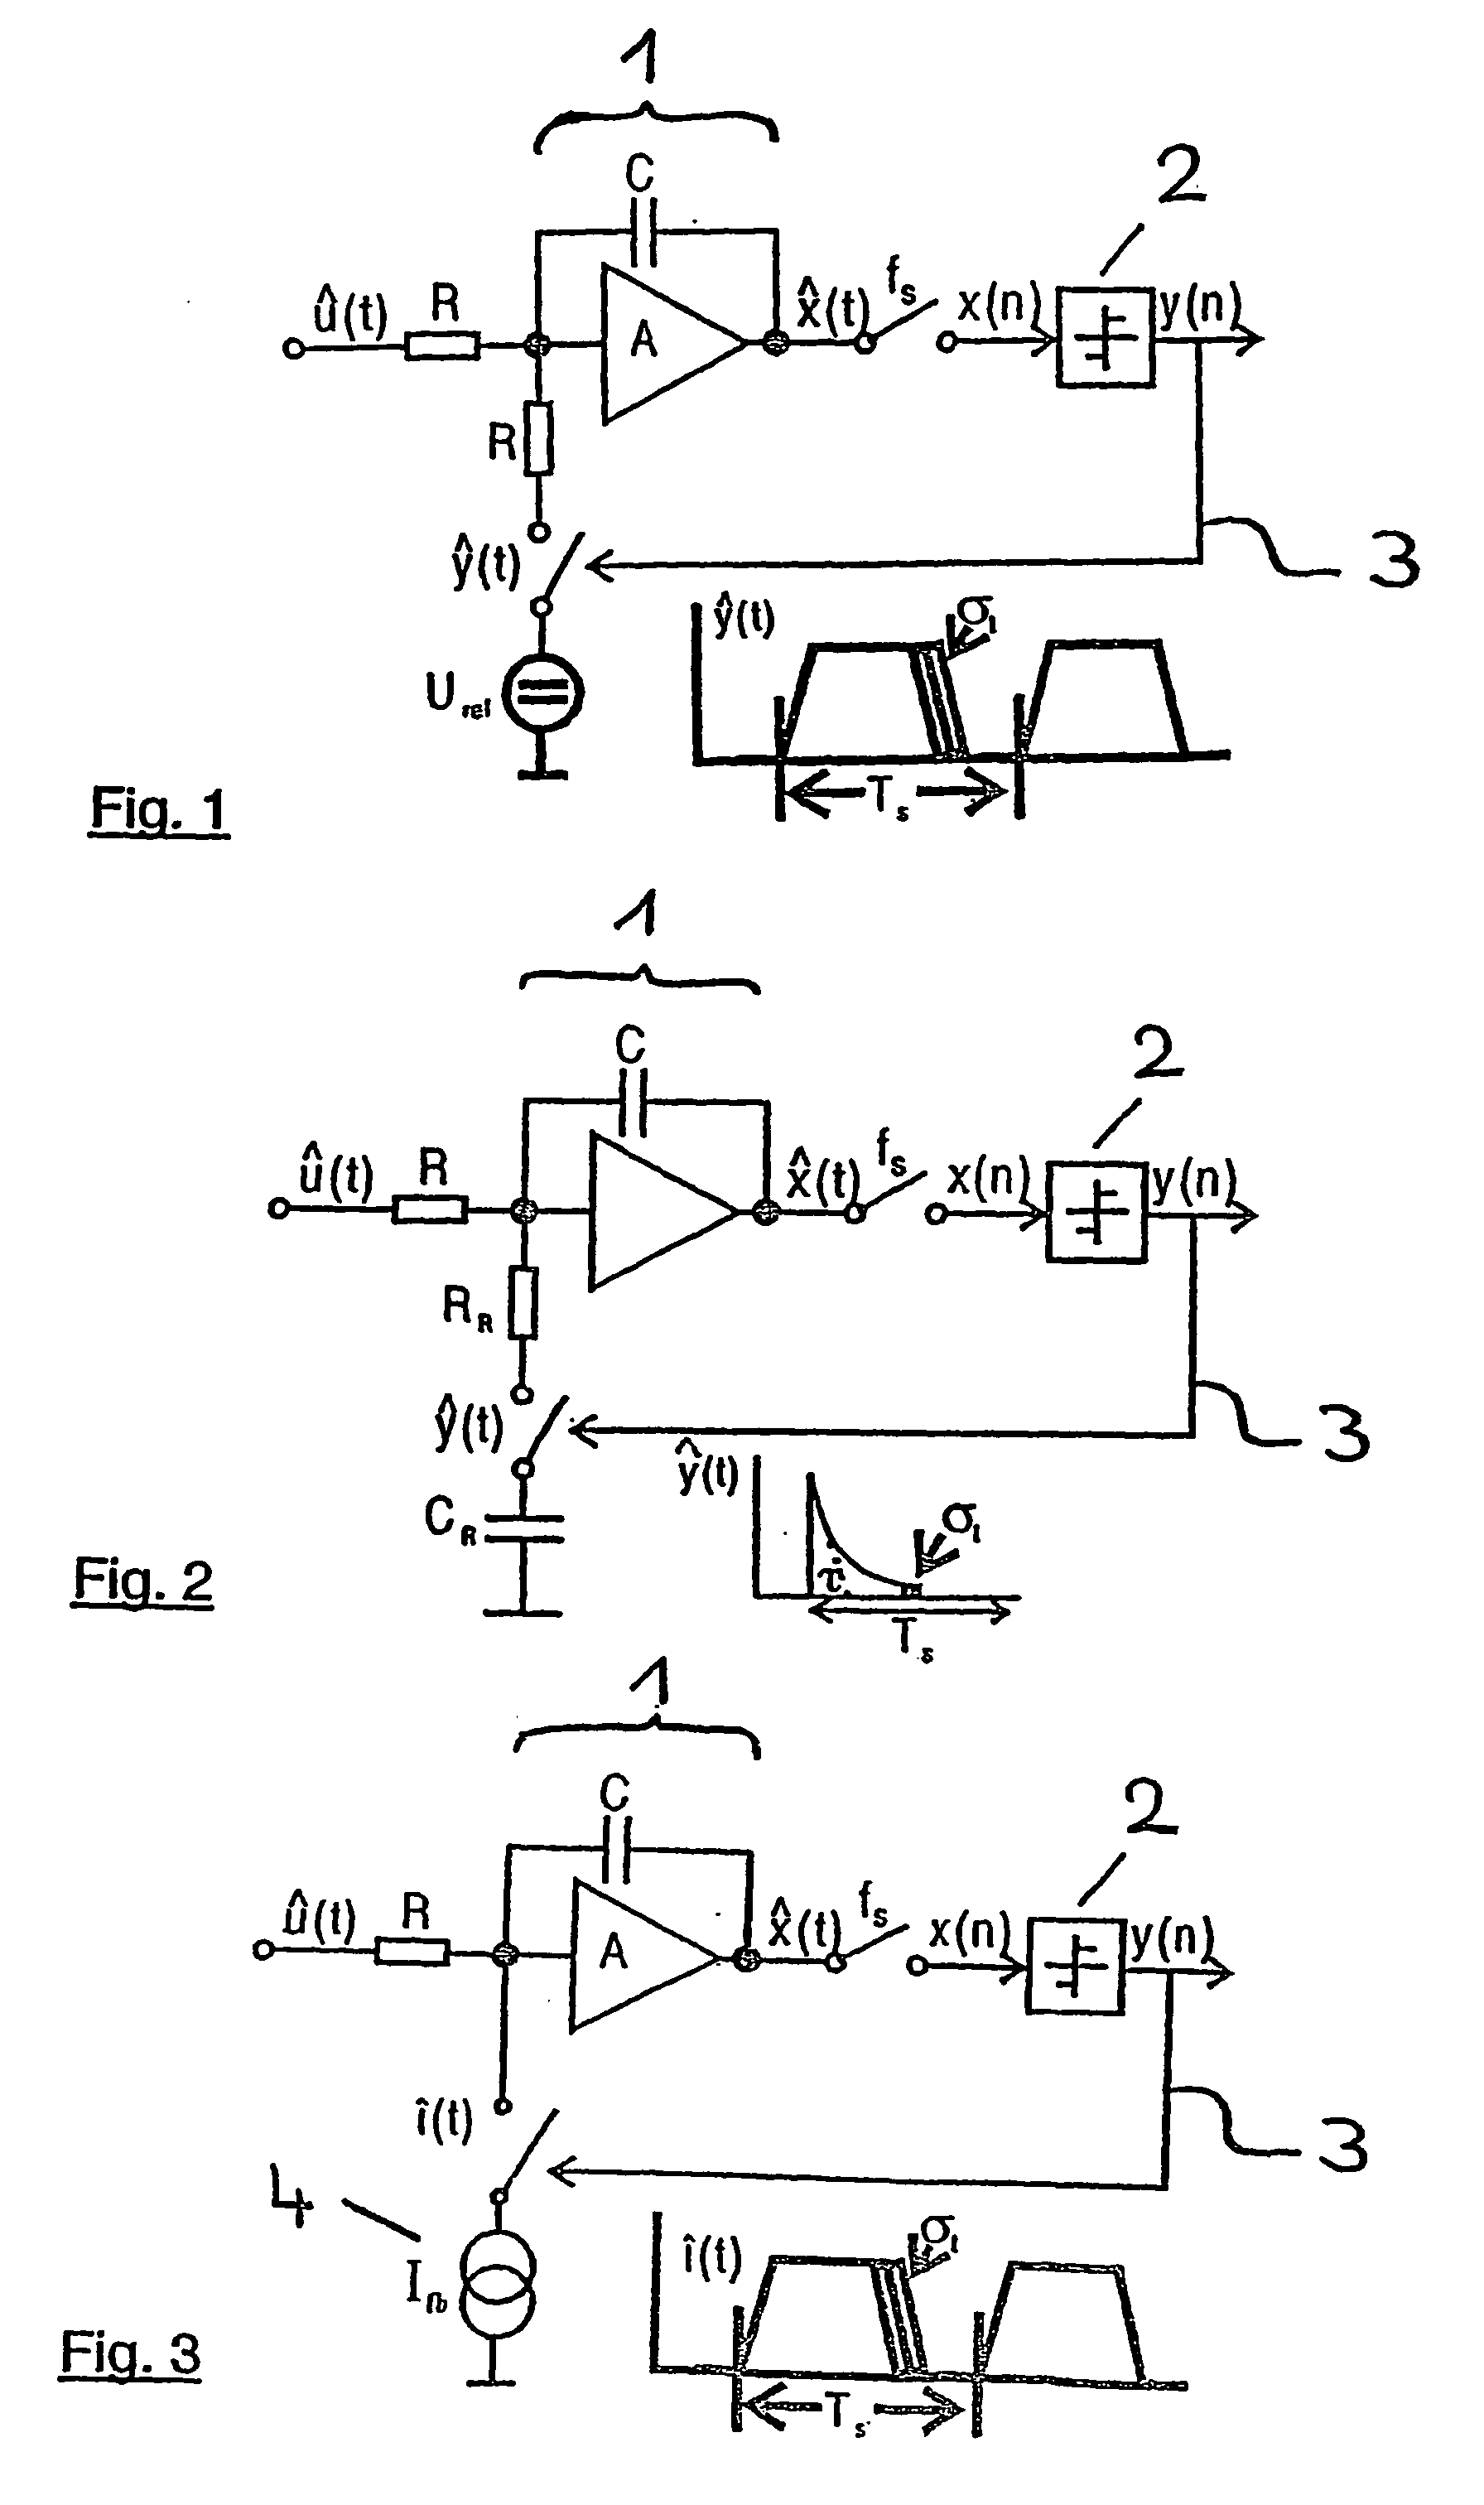 Controlled power source, in particular for a digital analogue converter in continuous time sigma delta modulators